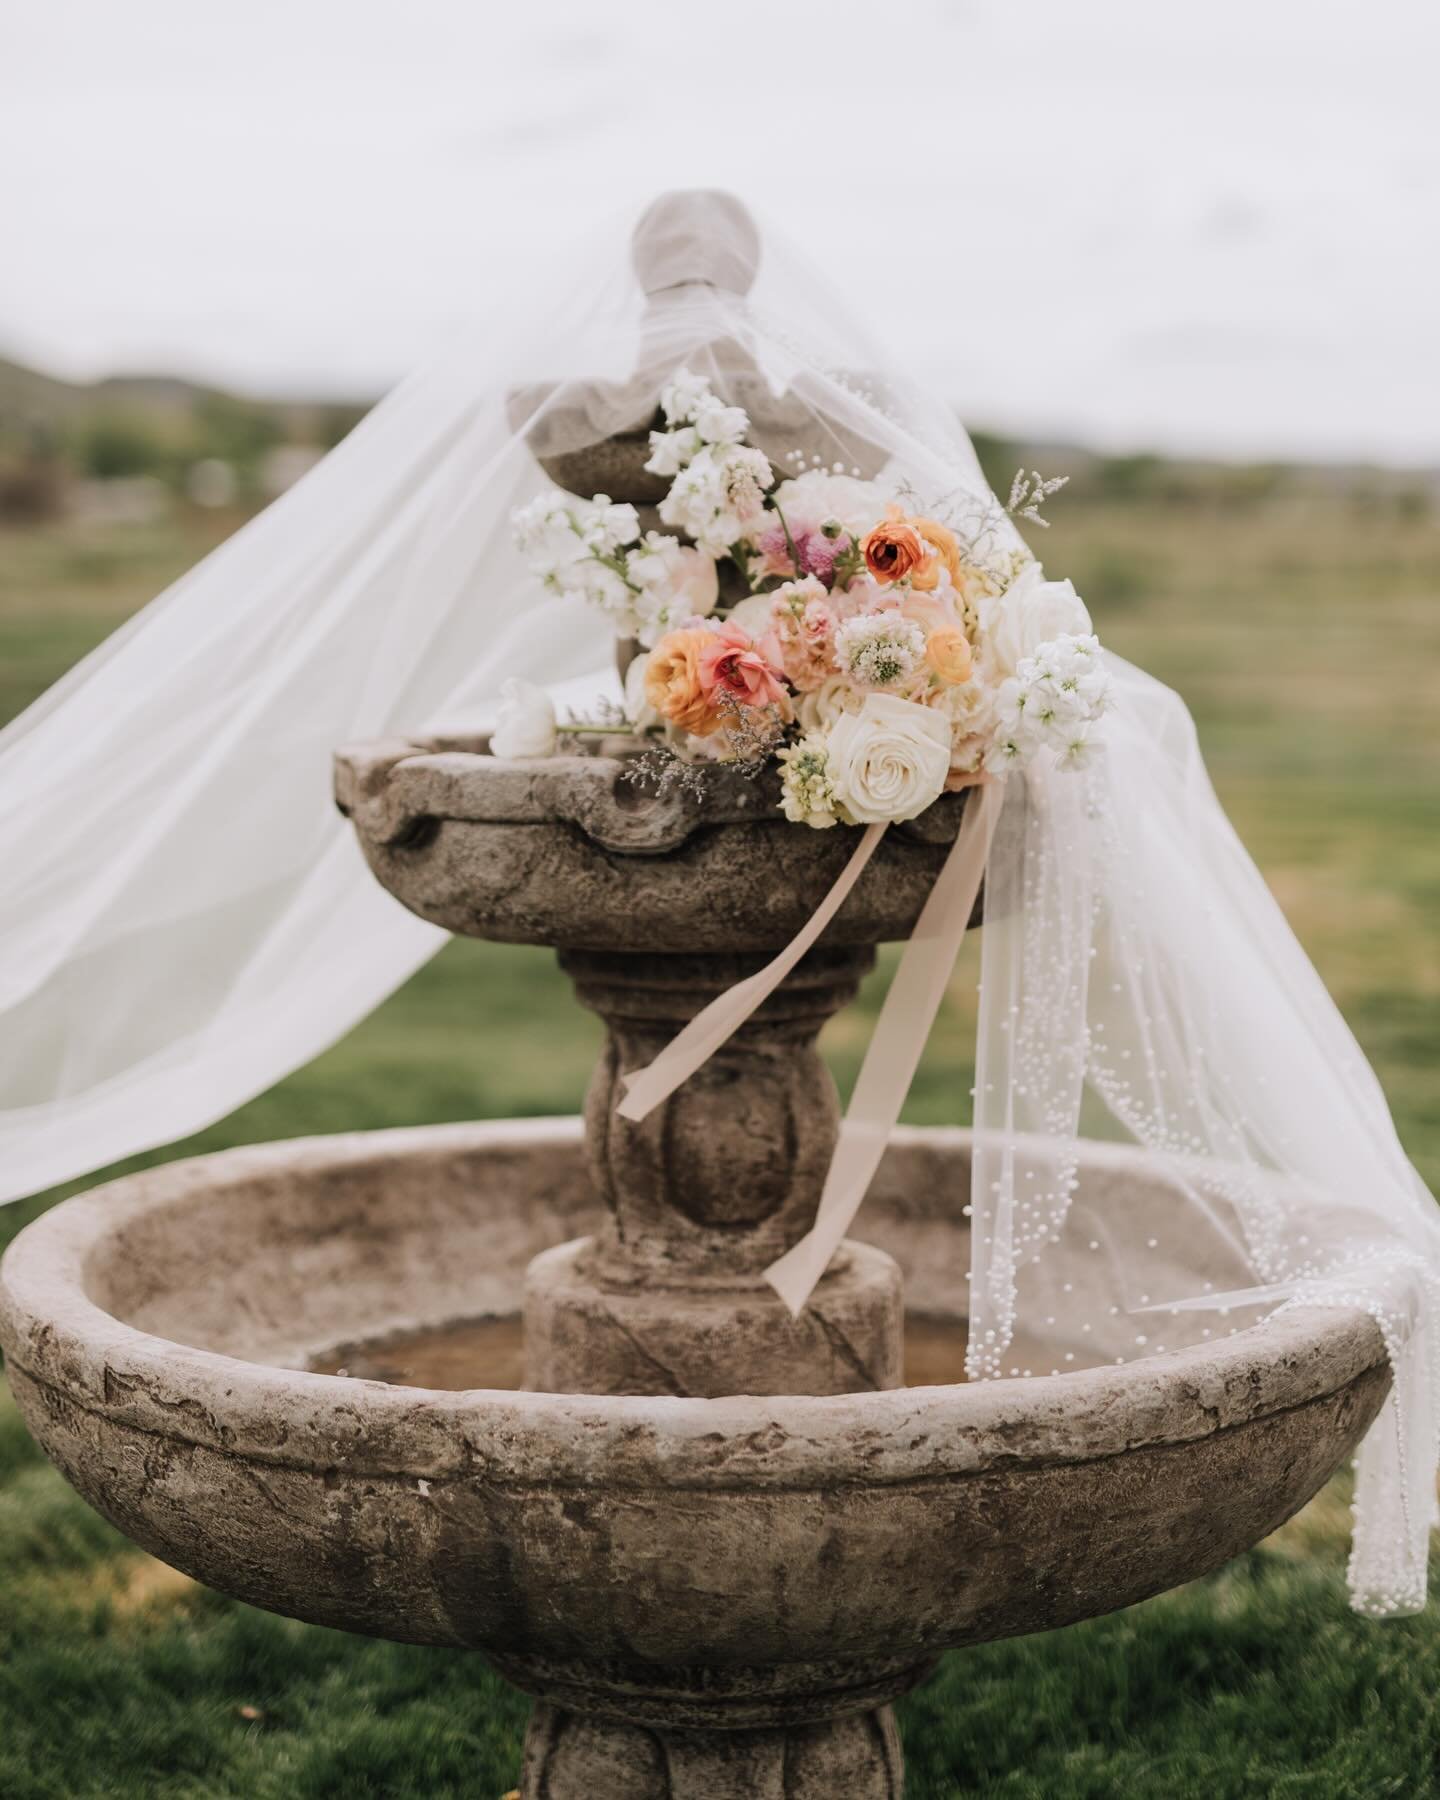 A moment for these romantic spring photos, the colors could not have been more beautiful!

Venue: @magnoliacottagevenue
Florals: @cedarboxblooms
Hair &amp; makeup: @idahostylists
Bar: @countylinewineco
Rentals: @golddust.specialtyrentals 
Models: @li